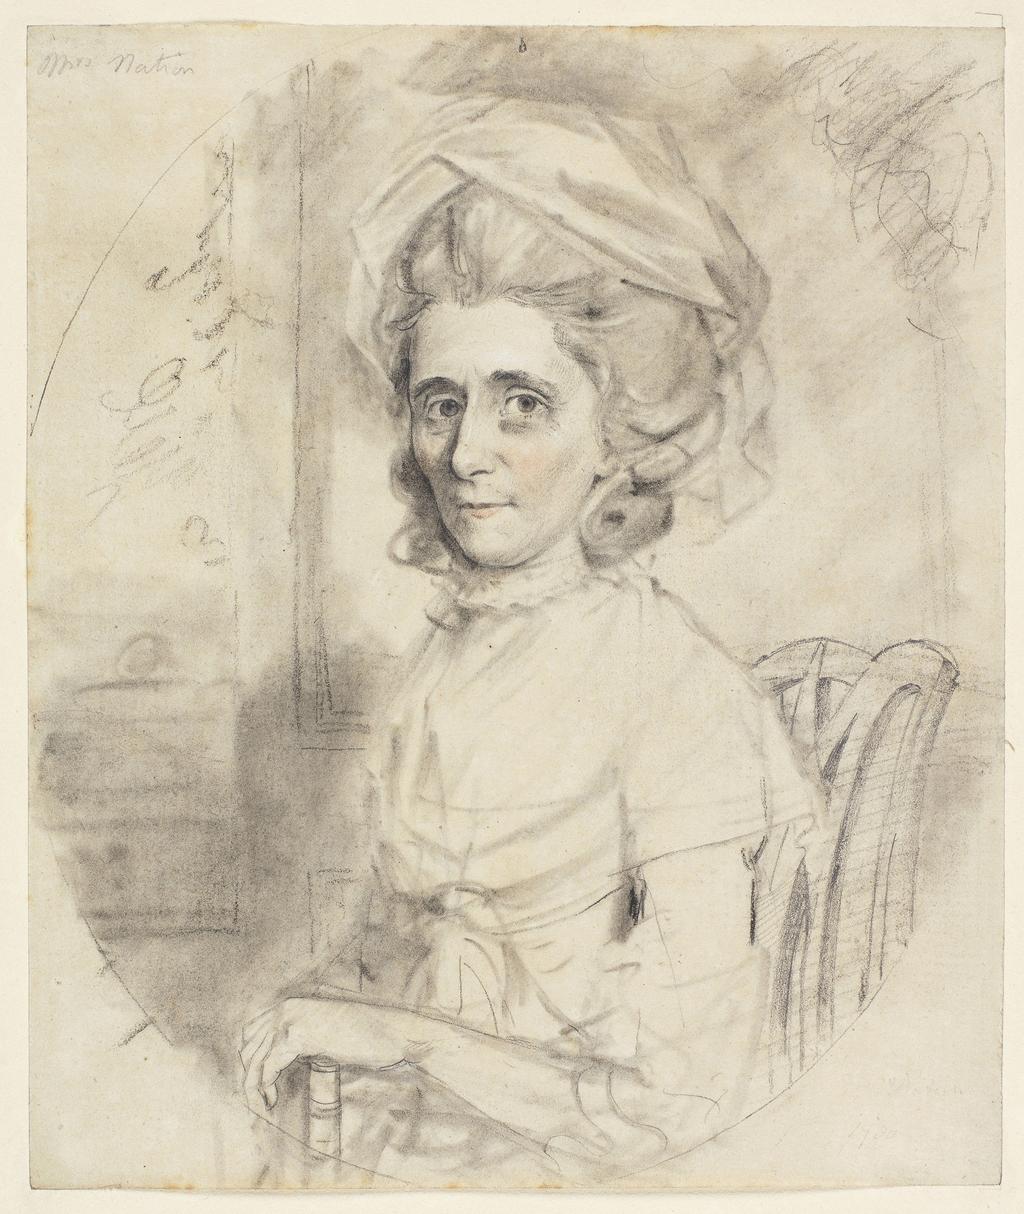 An image of Mrs Elizabeth Nation. Old Mrs Nation. Downman, John (British, 1750-1824). Black, red and white chalk with stump, some lines incised with a stylus, on paper, attached to mount sheet, height 225 mm, width 190 mm, 1780. Notes: by L.C.G. Clarke, "apparently the Mrs Nation who made a considerable fortune in High Street Exeter as a retailer of snuff and tobacco. The business is still in existence". 2nd Series, Vol, IV, No. 23.